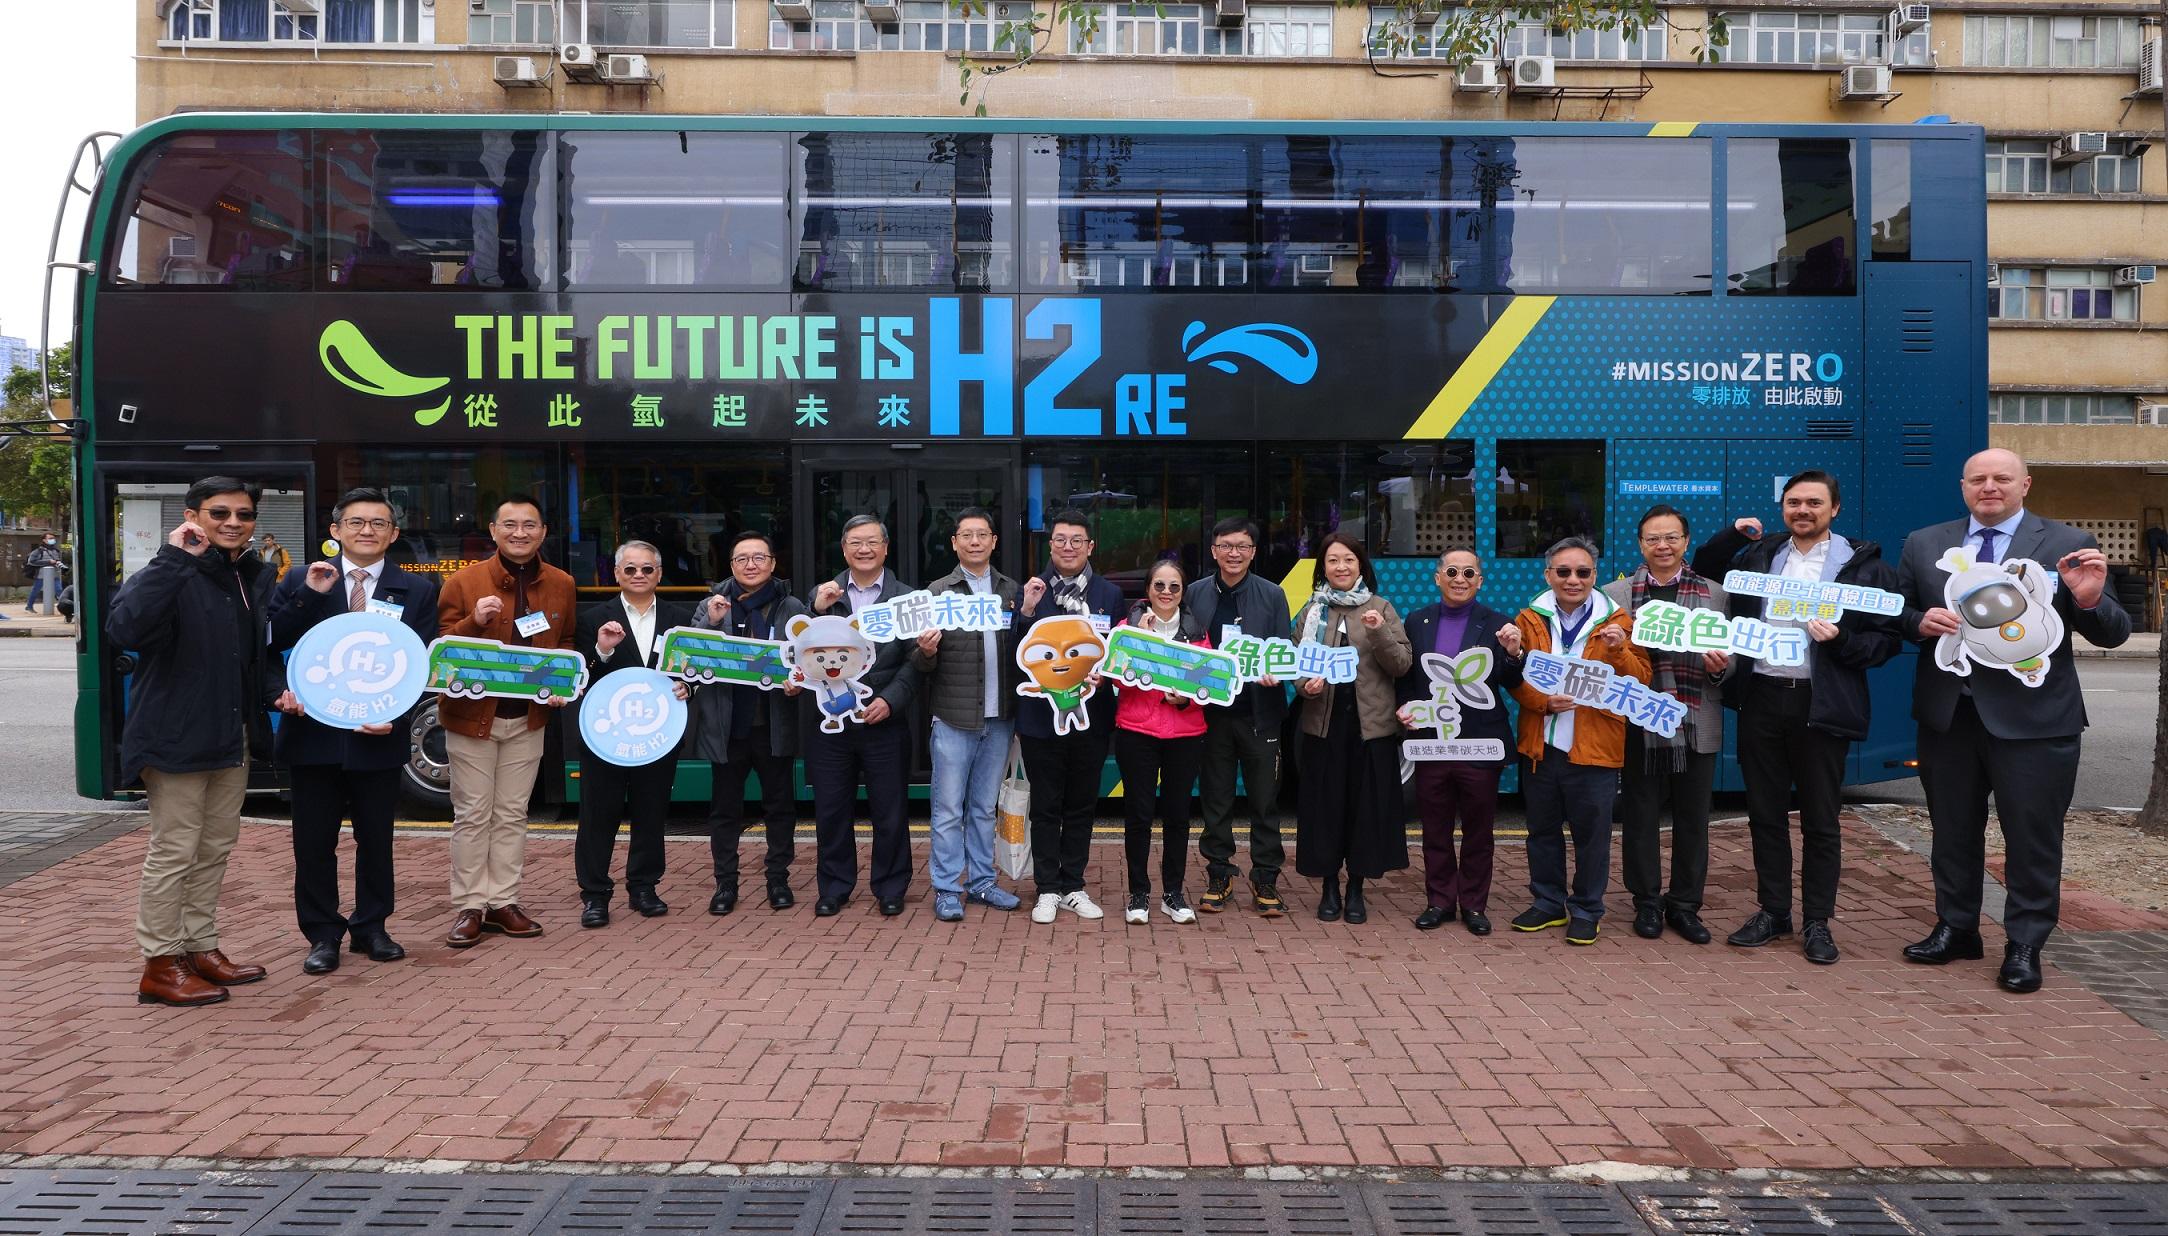 The "Green Travel for a Zero Carbon Future" - New Energy Bus Experience Day and Carnival was held at CIC-Zero Carbon Park today (March 2). Picture shows the Under Secretary for Environment and Ecology, Miss Diane Wong (eighth right); the Chairman of the Environmental Campaign Committee, Professor Simon Wong (seventh left); the Chairman of the Environment and Conservation Fund Committee, Dr Eric Cheng (fifth left); the Under Secretary for Transport and Logistics, Mr Liu Chun-san (seventh right), and other guests in front of the hydrogen double-decker bus.